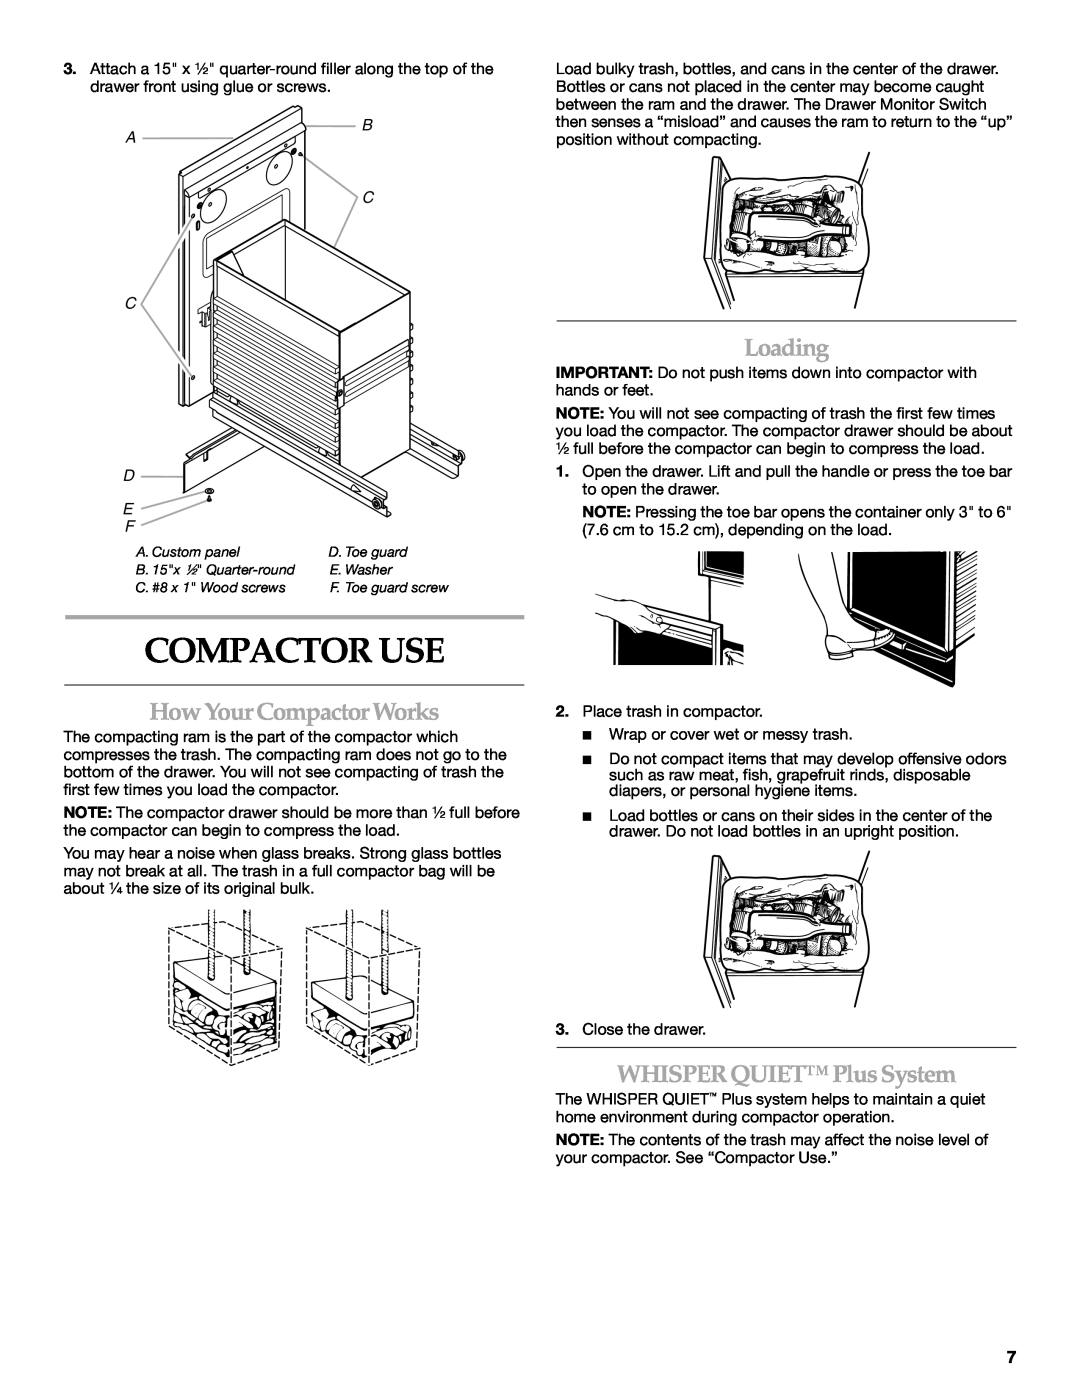 KitchenAid 9871915B manual Compactor Use, Loading, How Your Compactor Works, WHISPER QUIET PlusSystem, D E F 